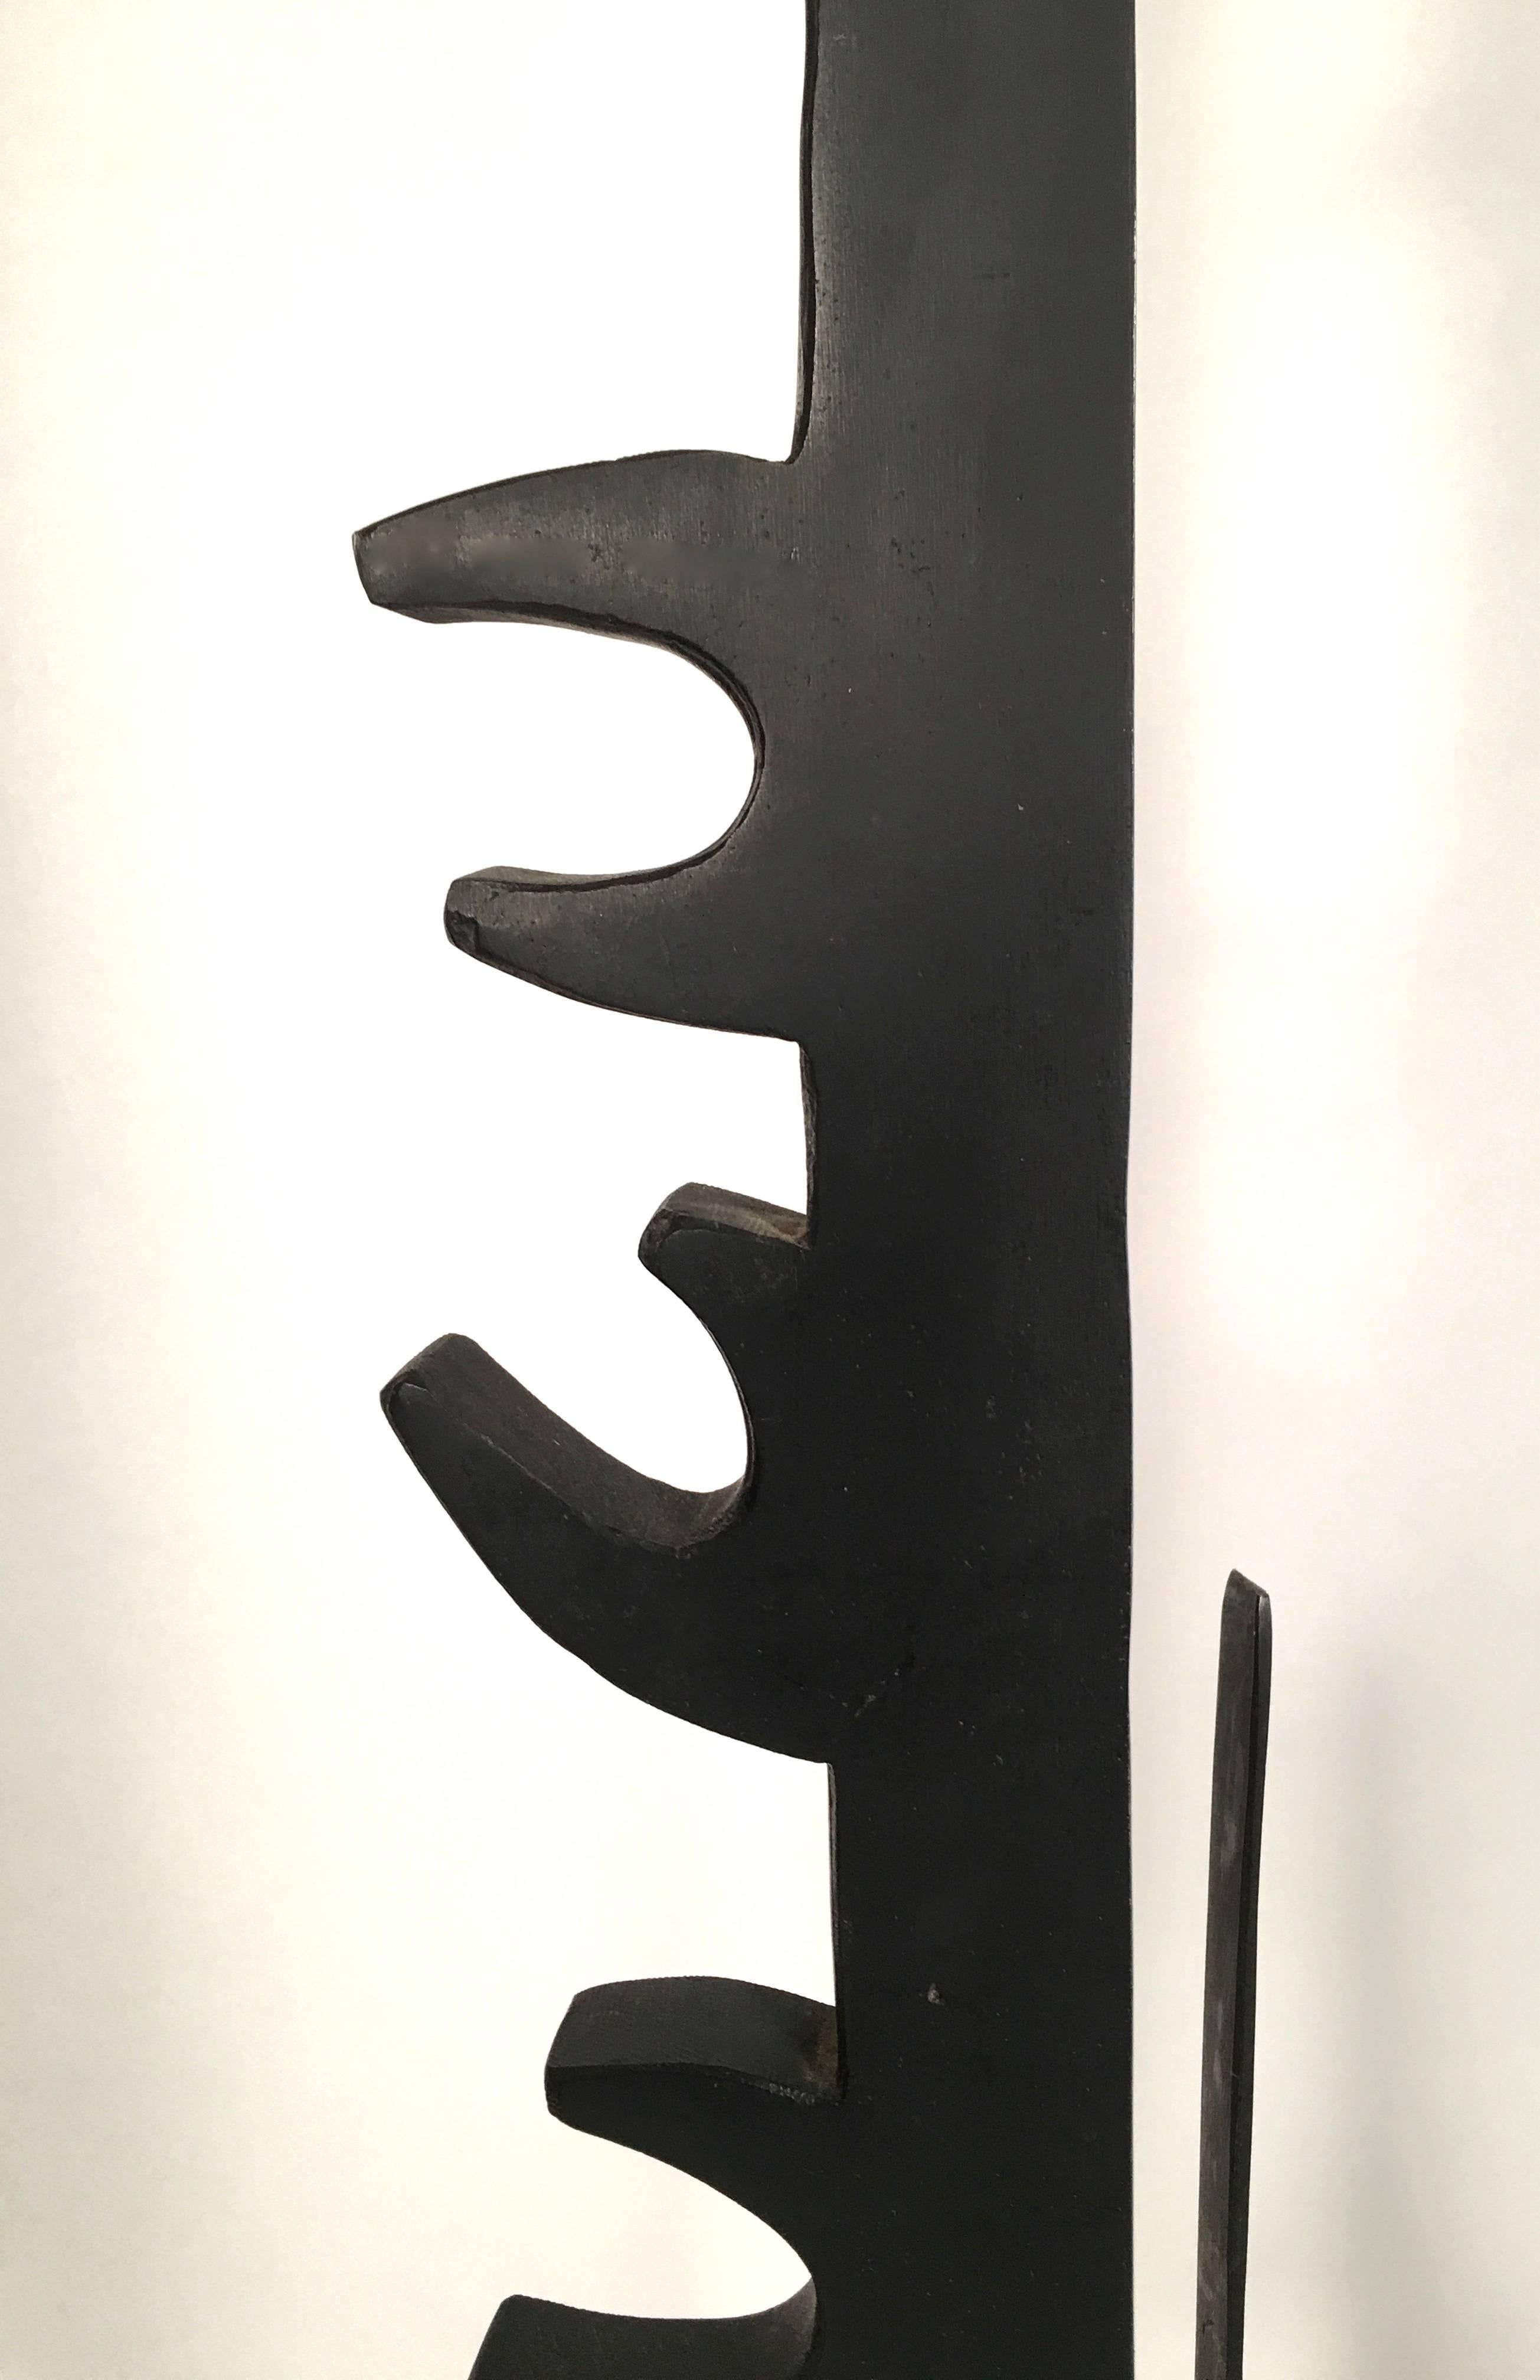 Ebonized Mid-Century Modern Metal Sculpture in the manner of Louise Nevelson